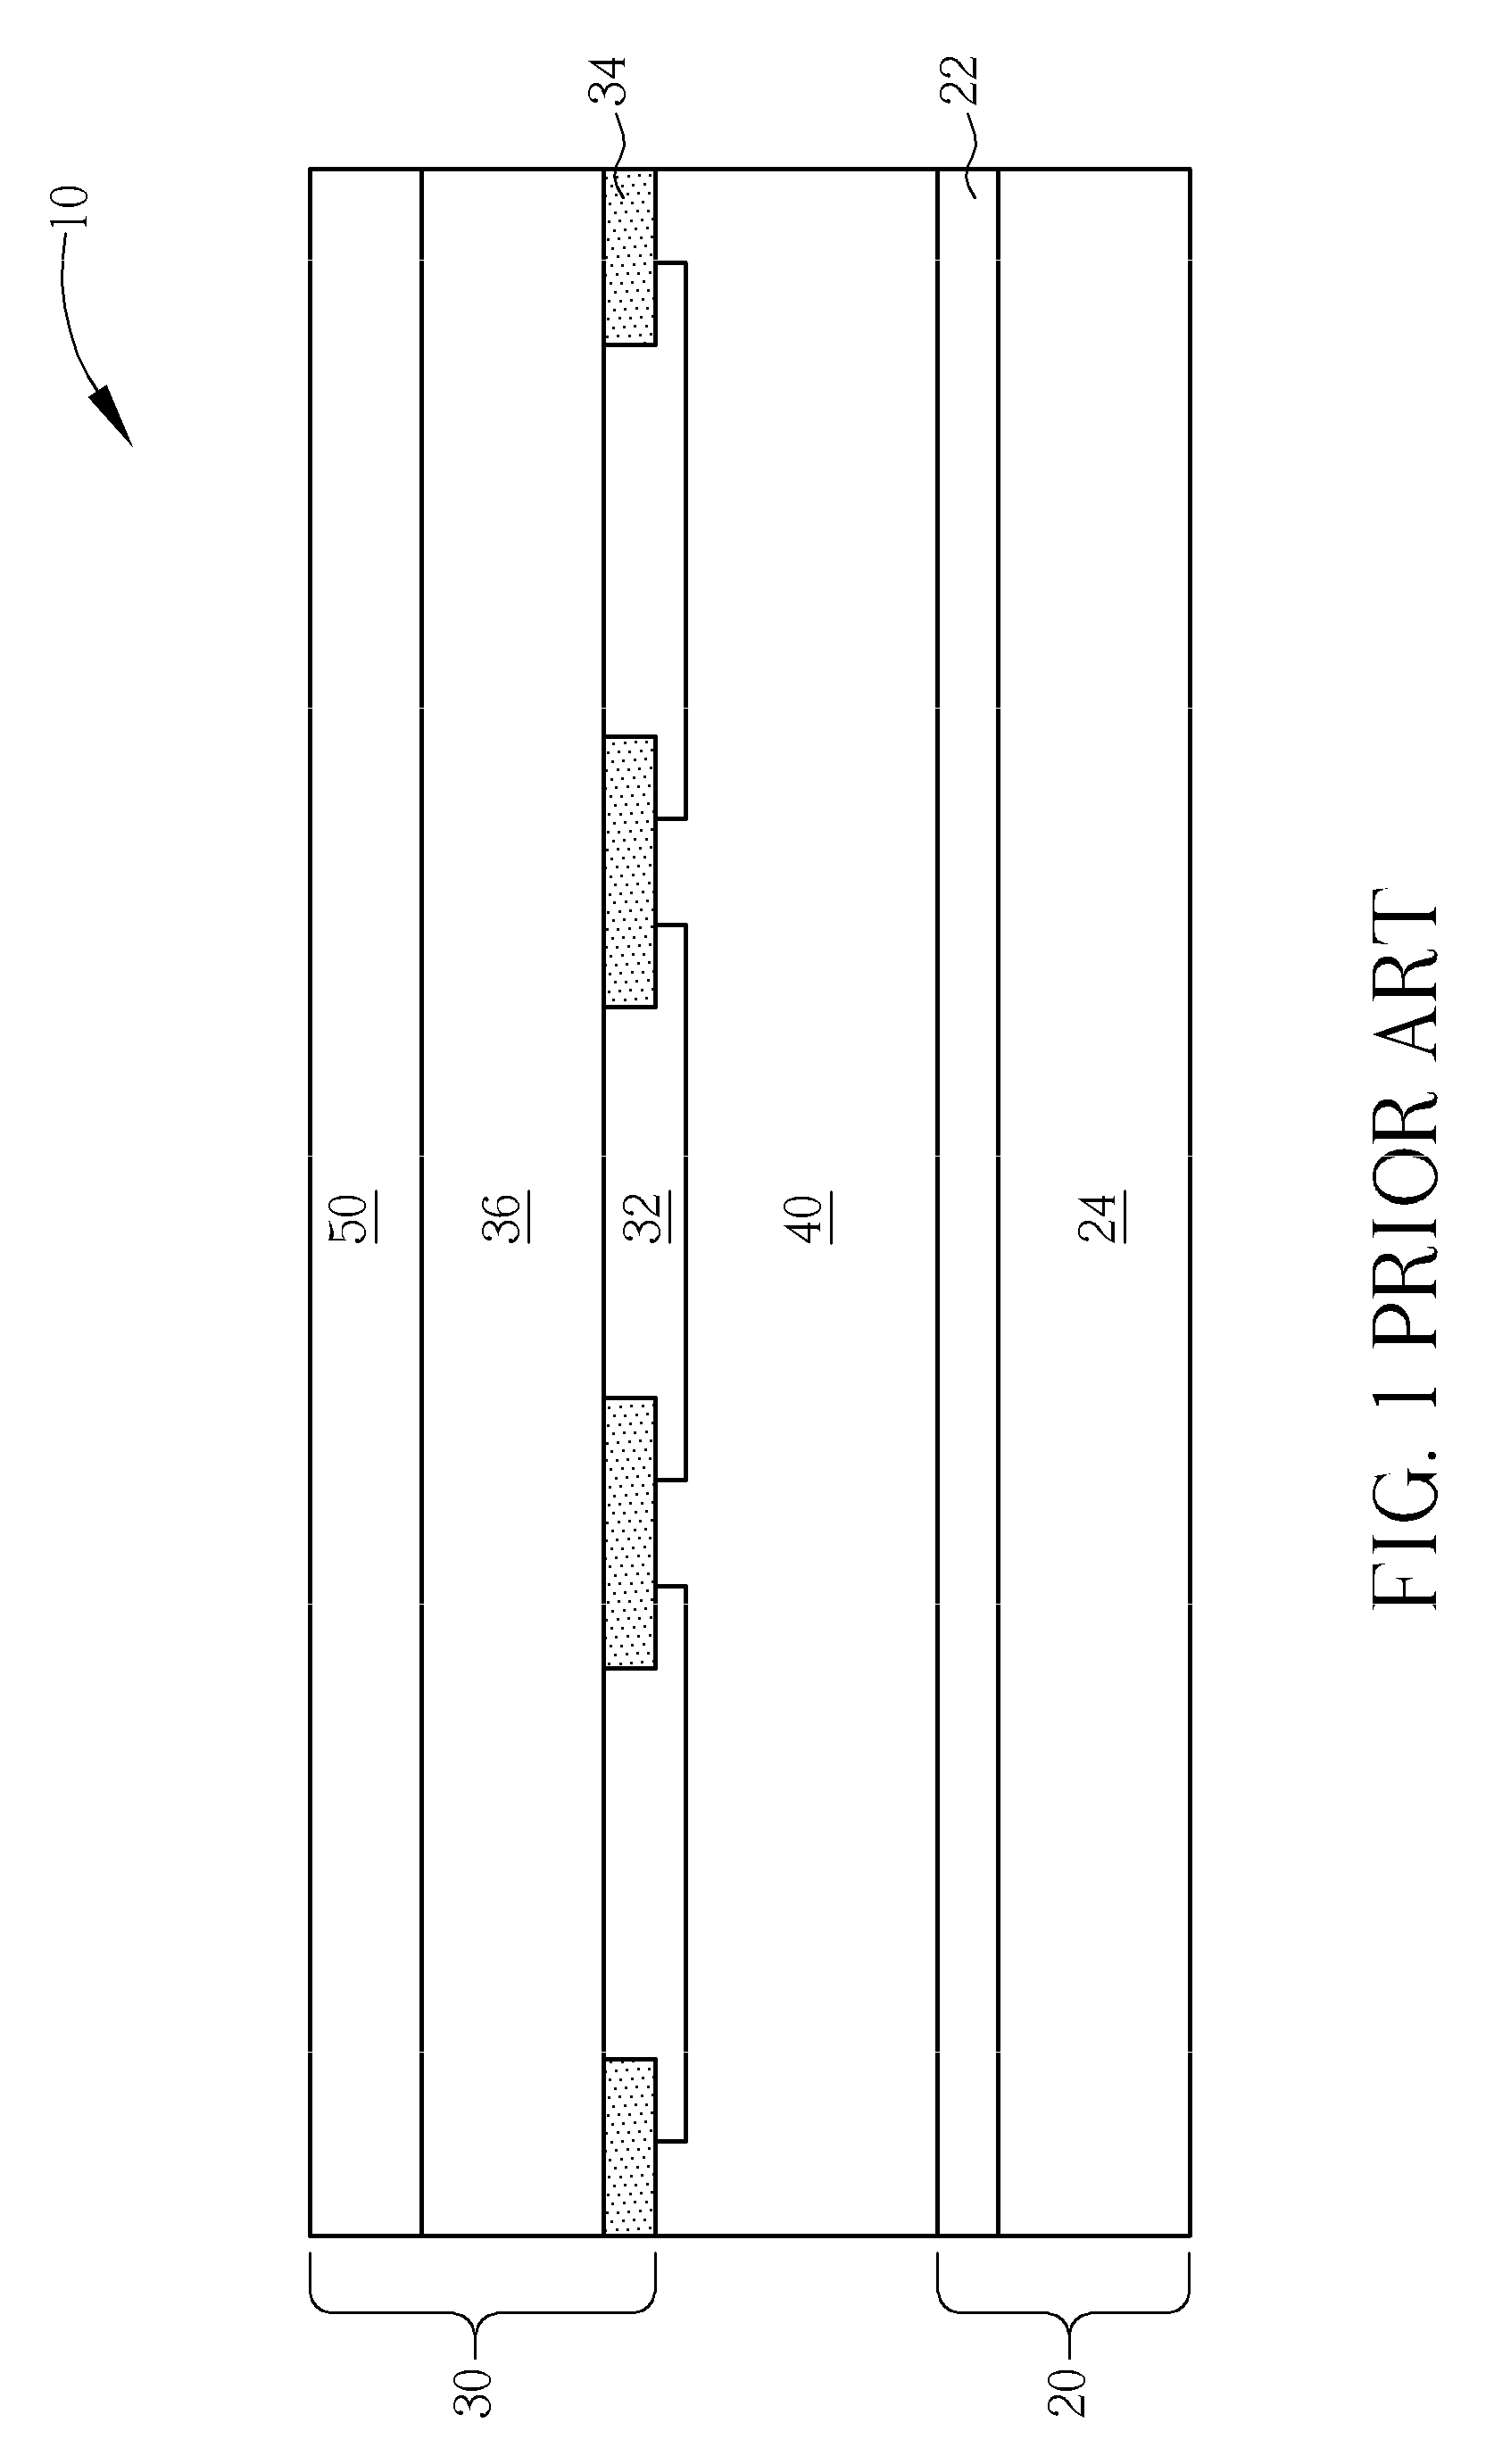 Method of forming a color filter touch sensing substrate